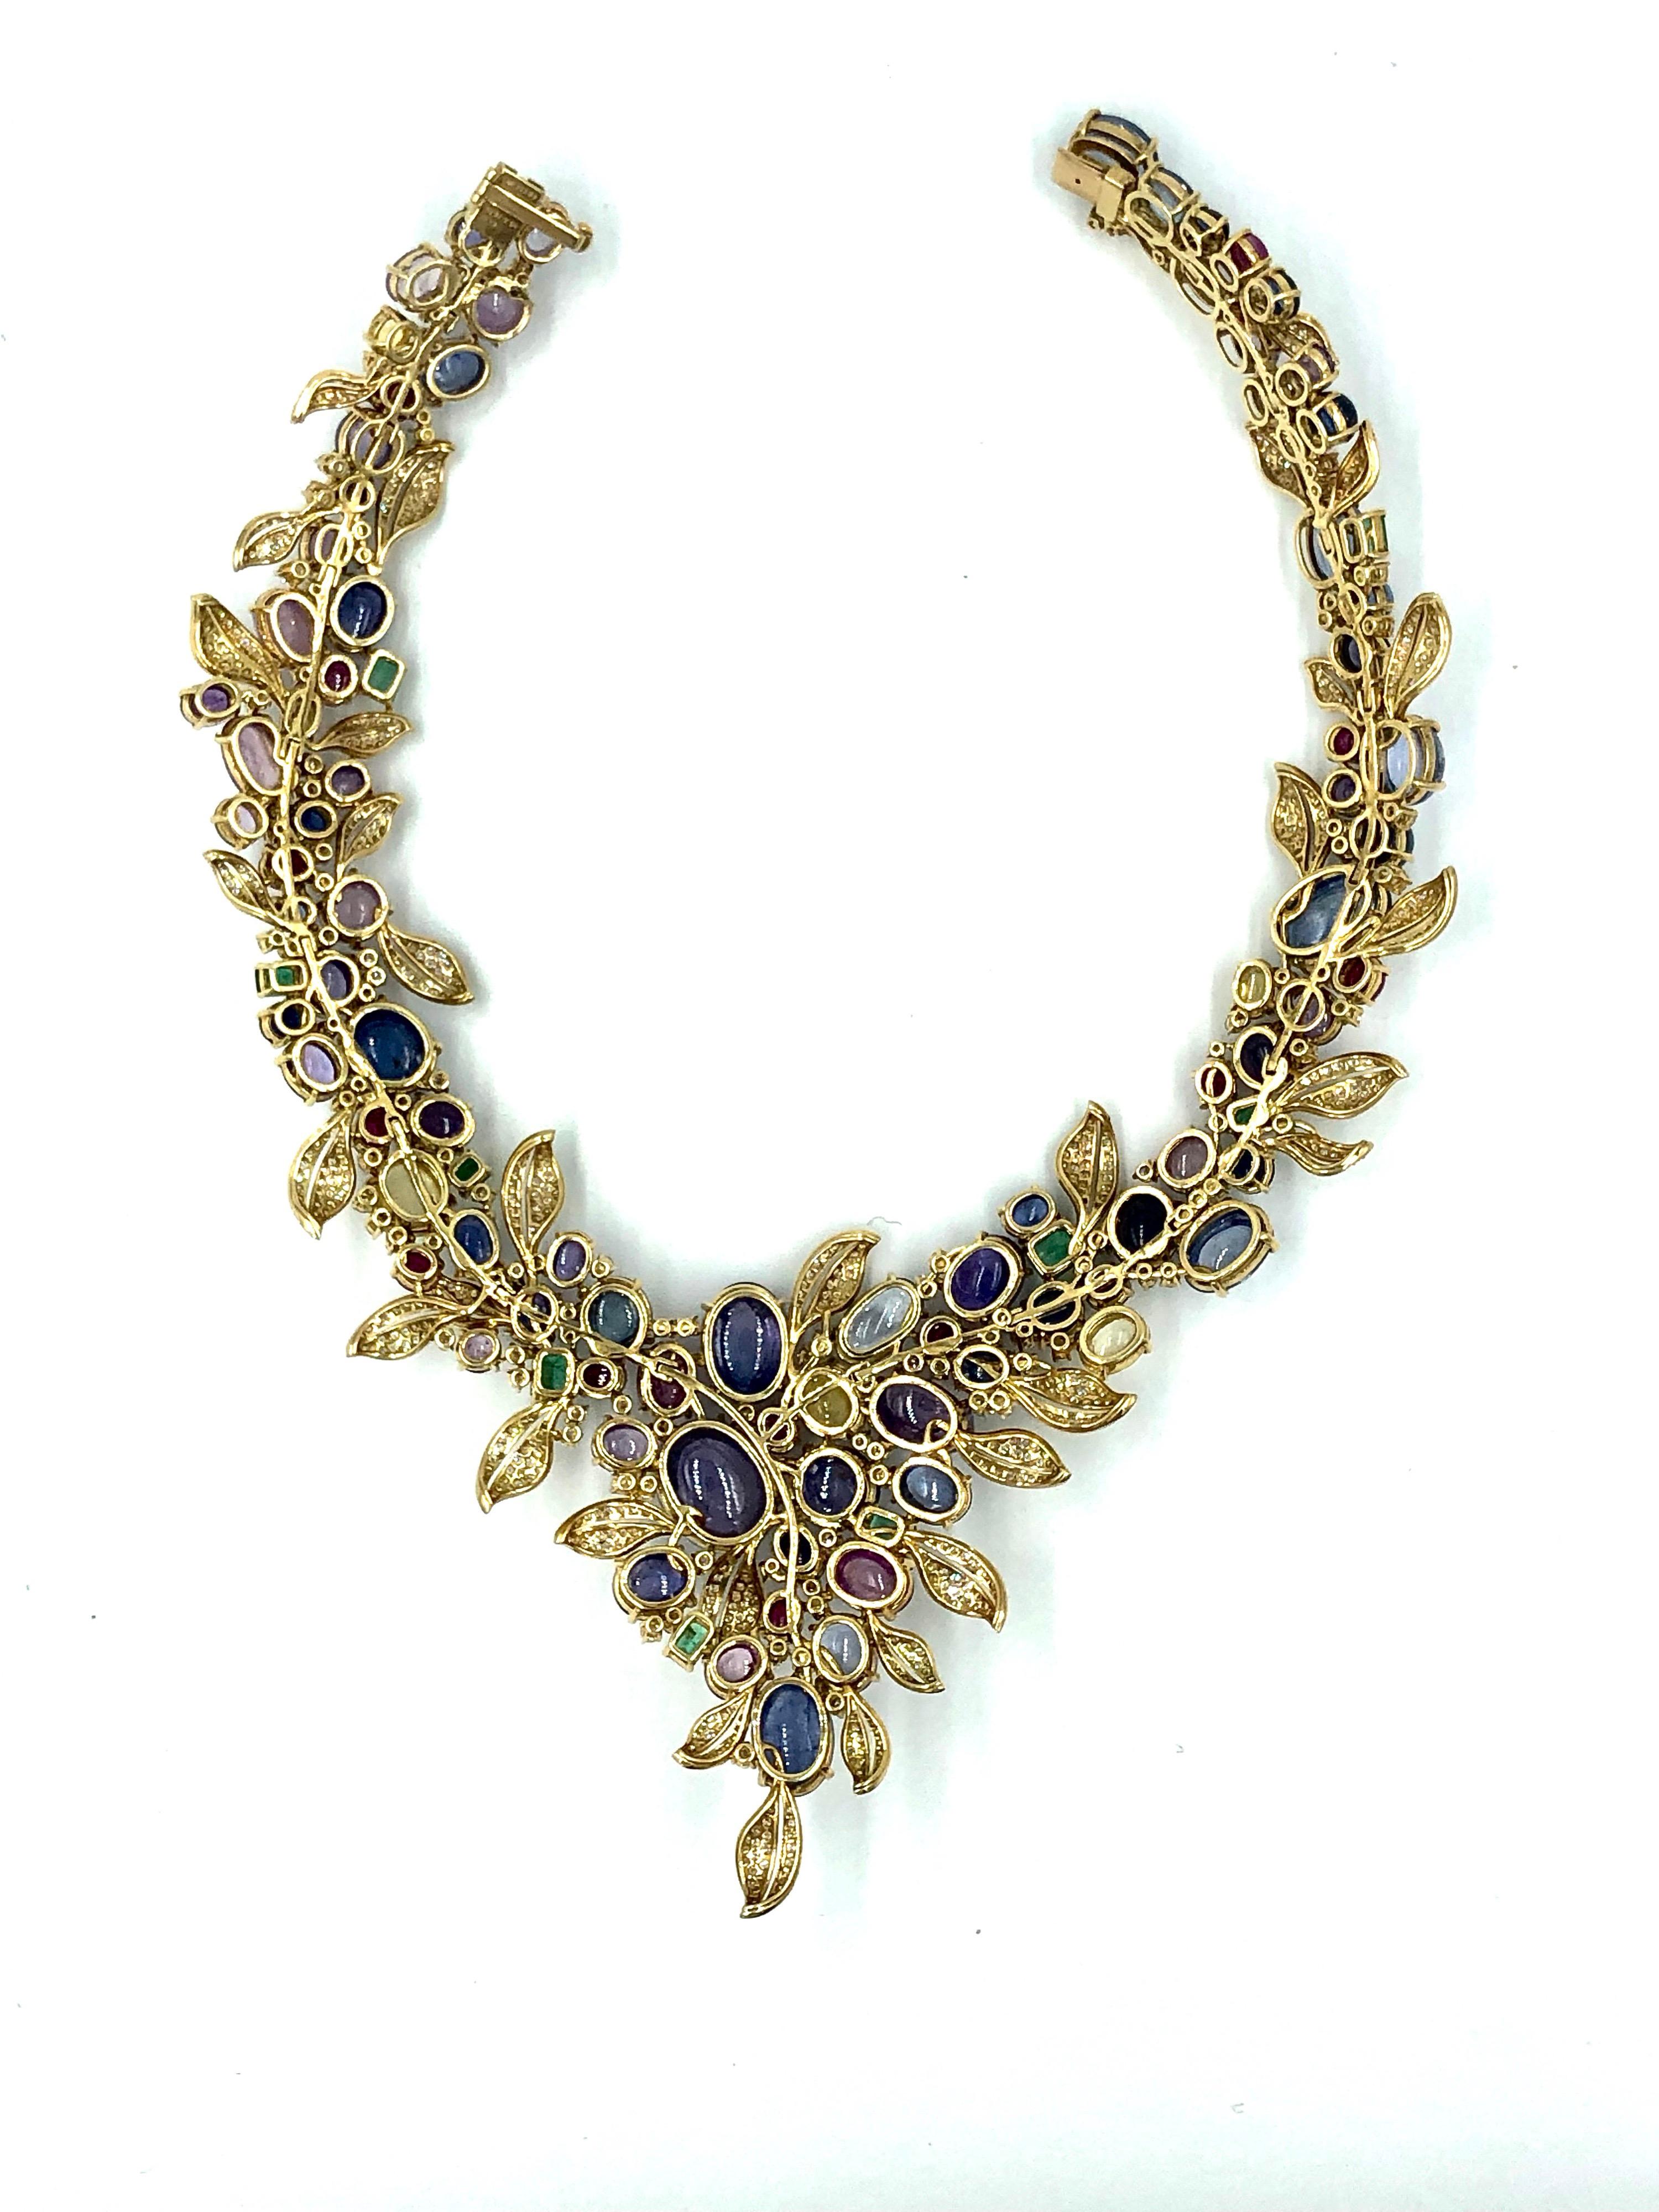 imagine arriving to your occasion wearing this necklace and earring set inspired by the vintage 